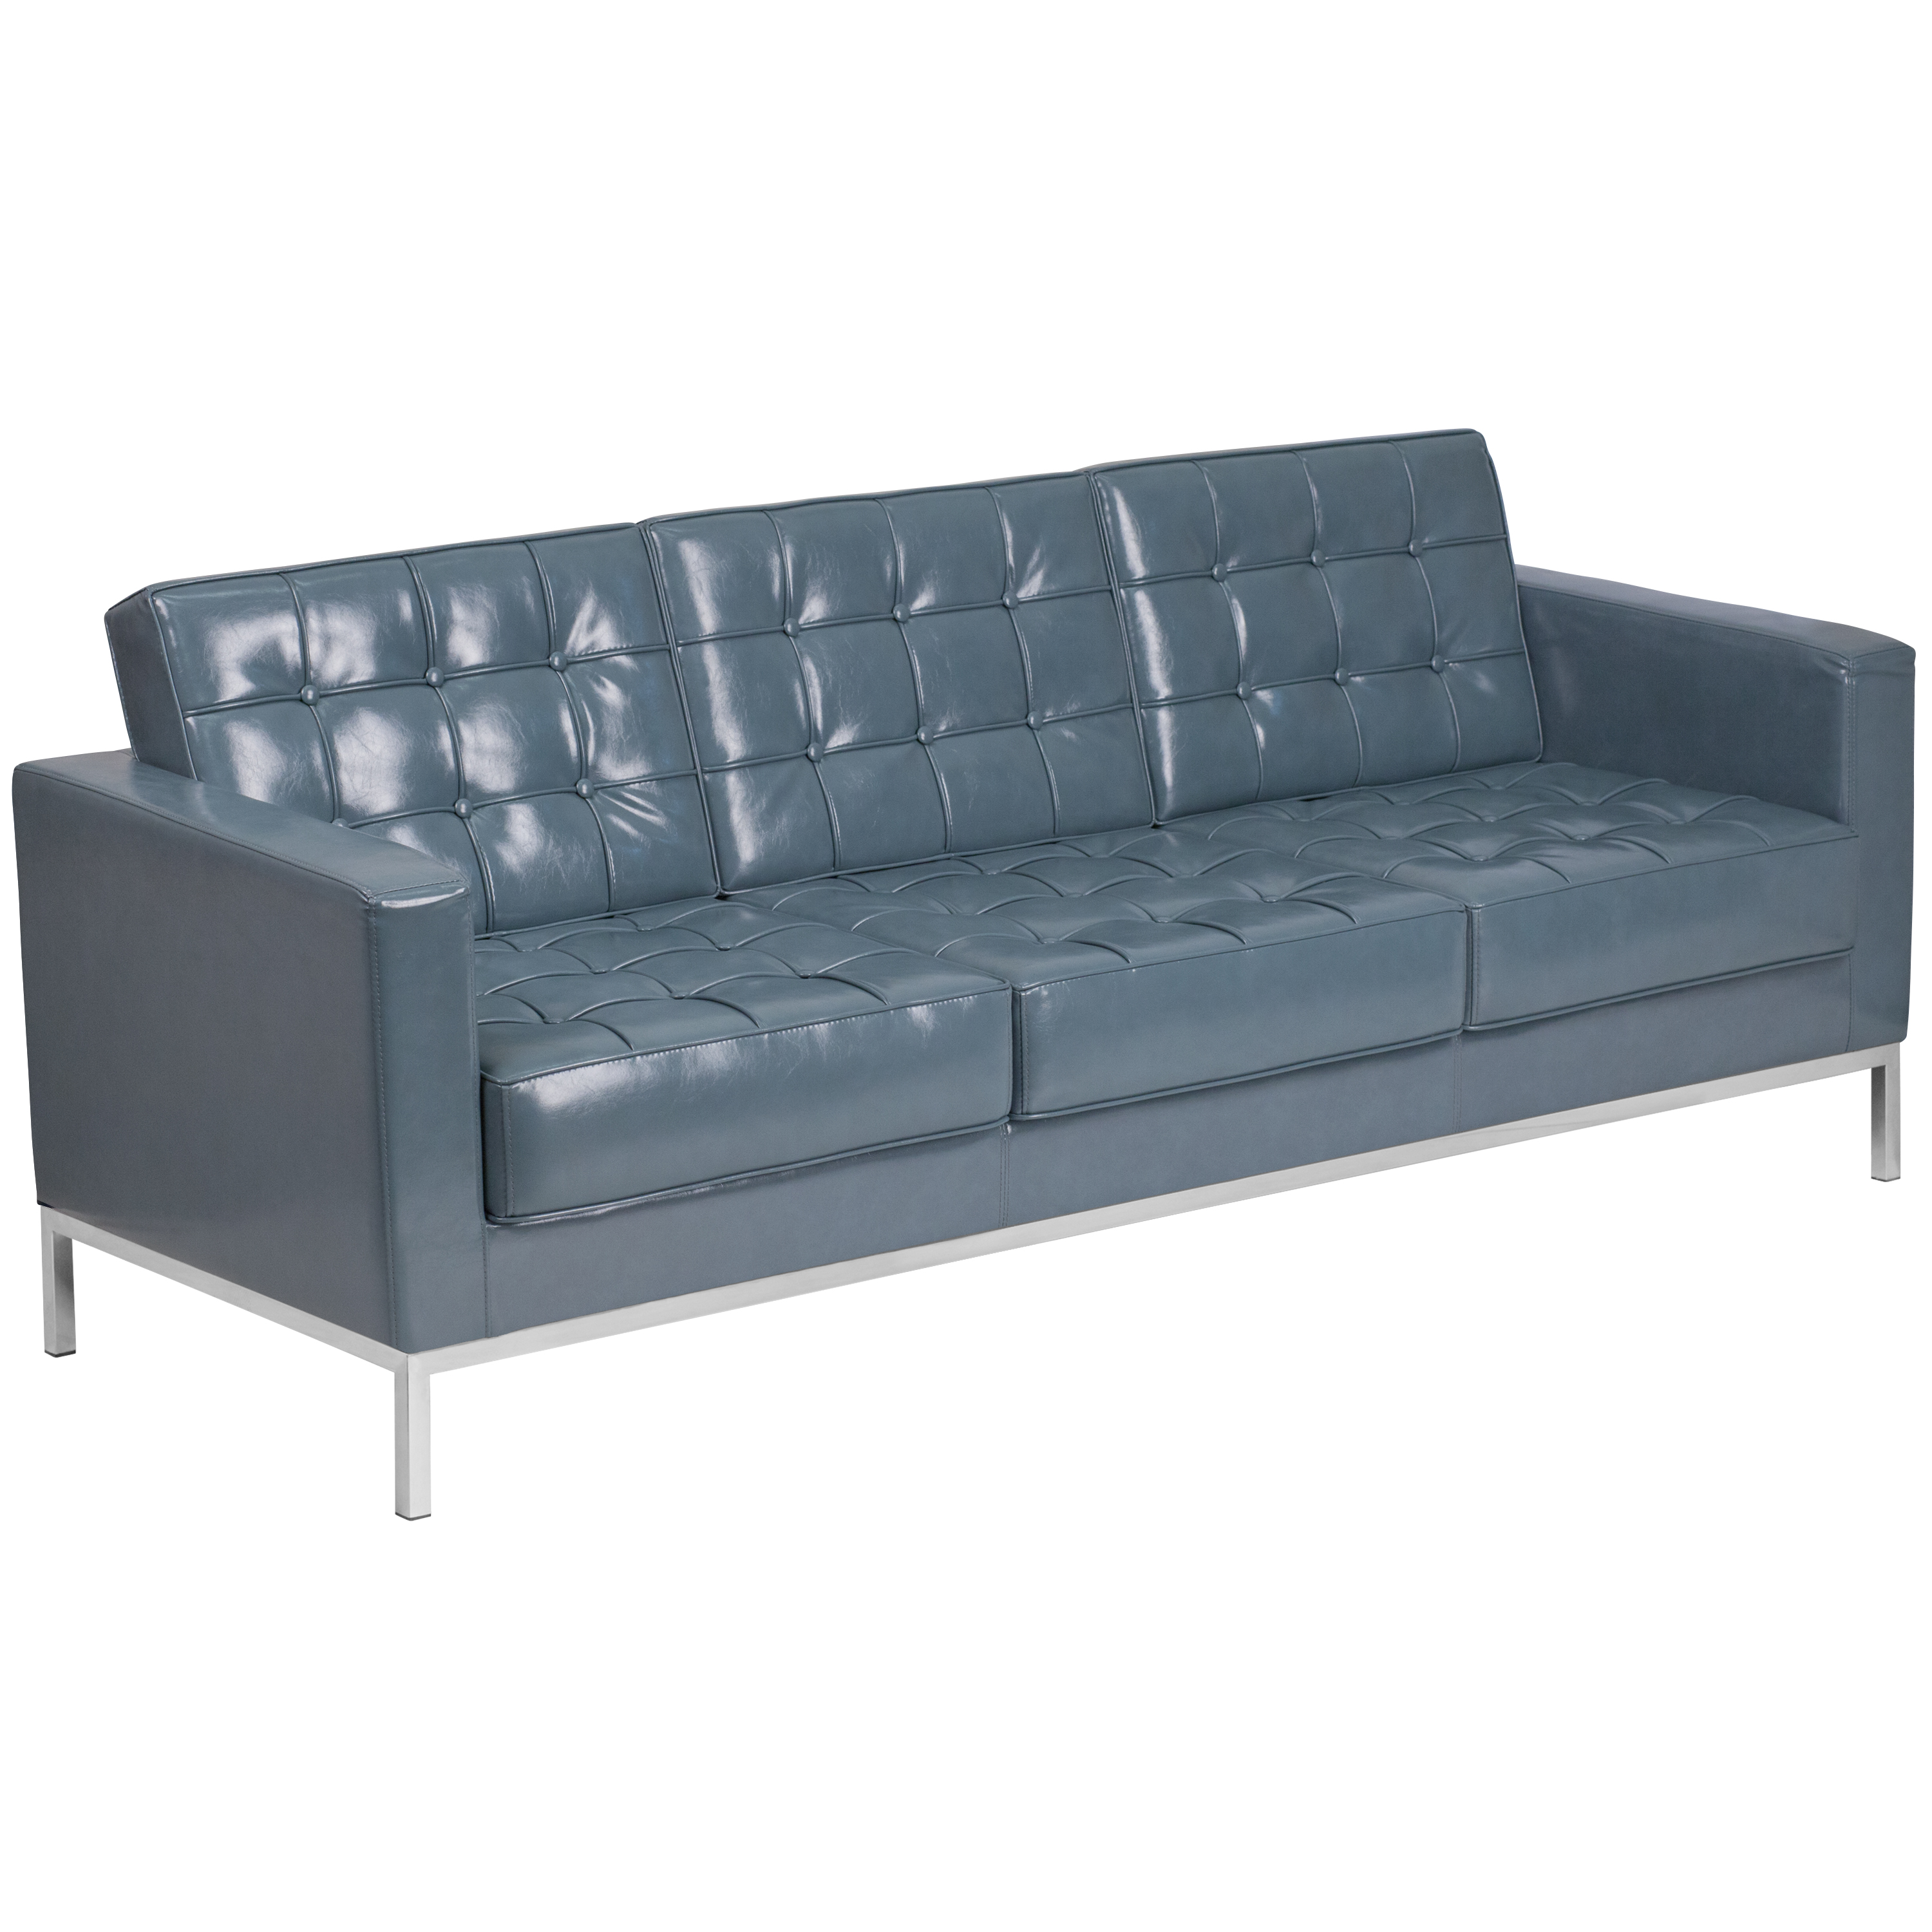 Flash Furniture ZB-LACEY-831-2-SOFA-GY-GG Hercules Lacey Series Contemporary Gray LeatherSoft Sofa with Stainless Steel Frame